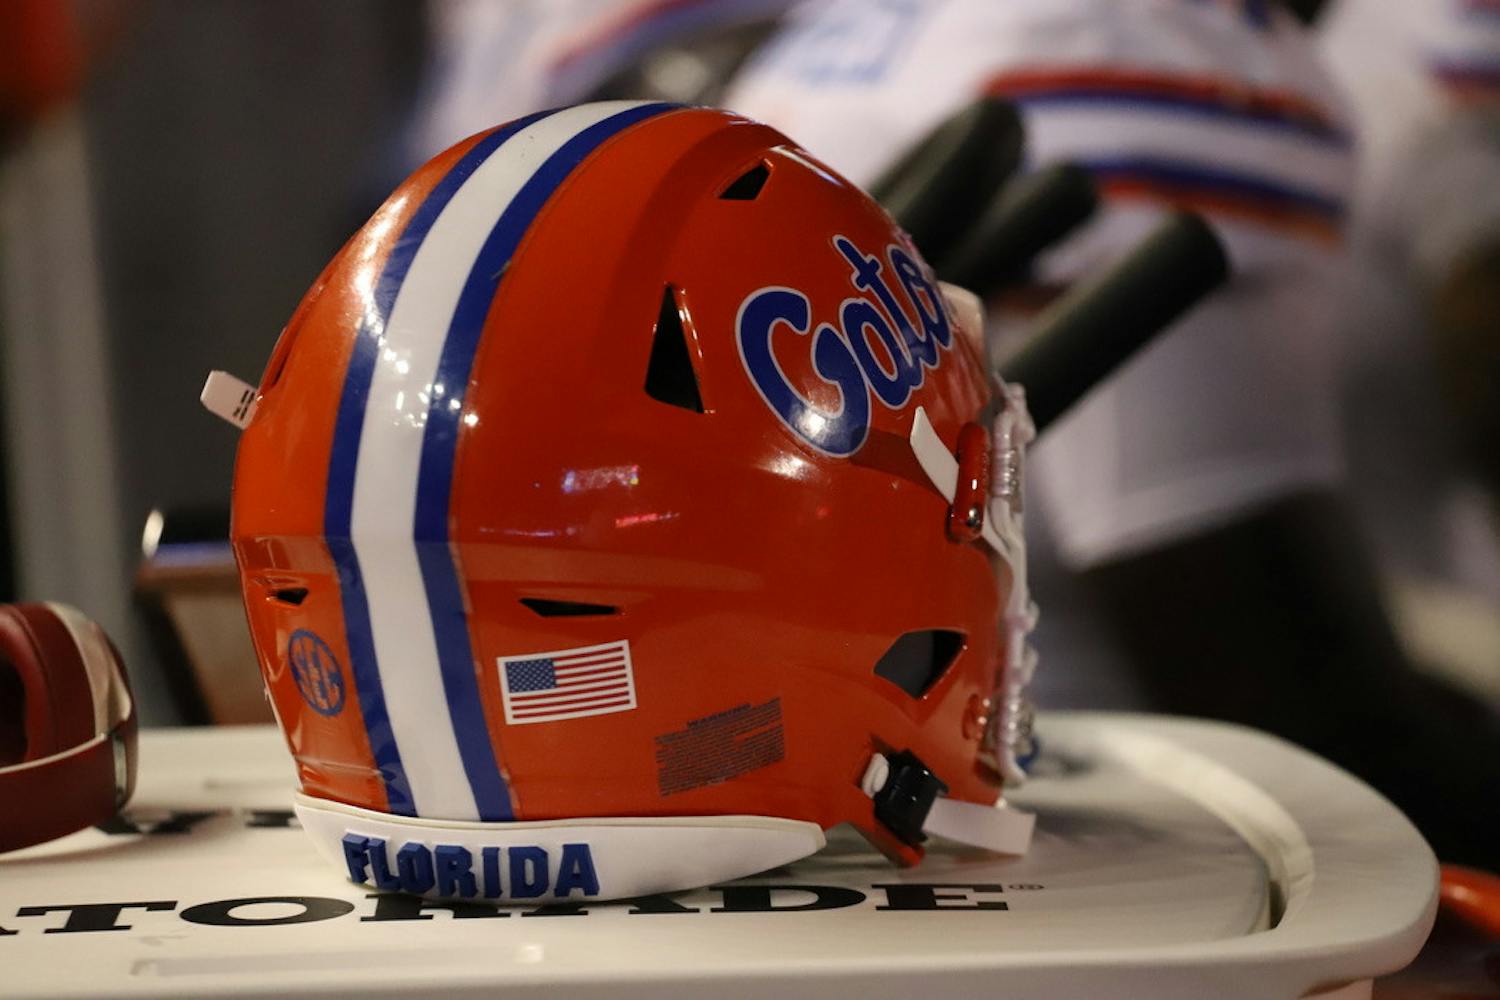 A Florida football helmet, pictured during a game against Florida Atlantic on Sept. 4, 2021.